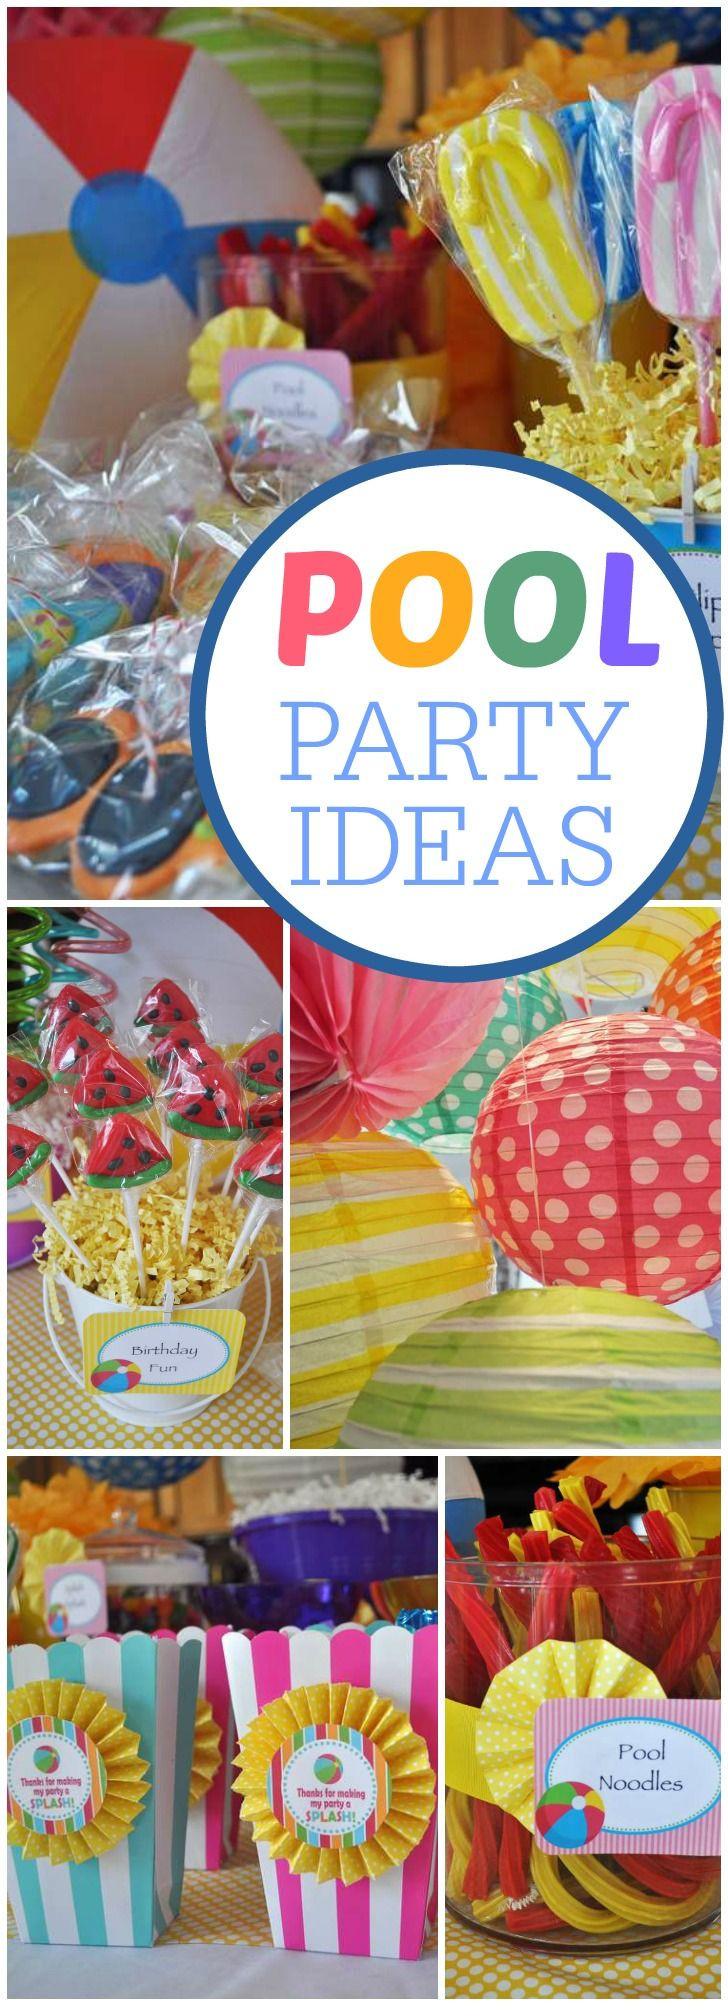 Fun Pool Party Ideas
 This fun pool birthday party has lots of flip flops and